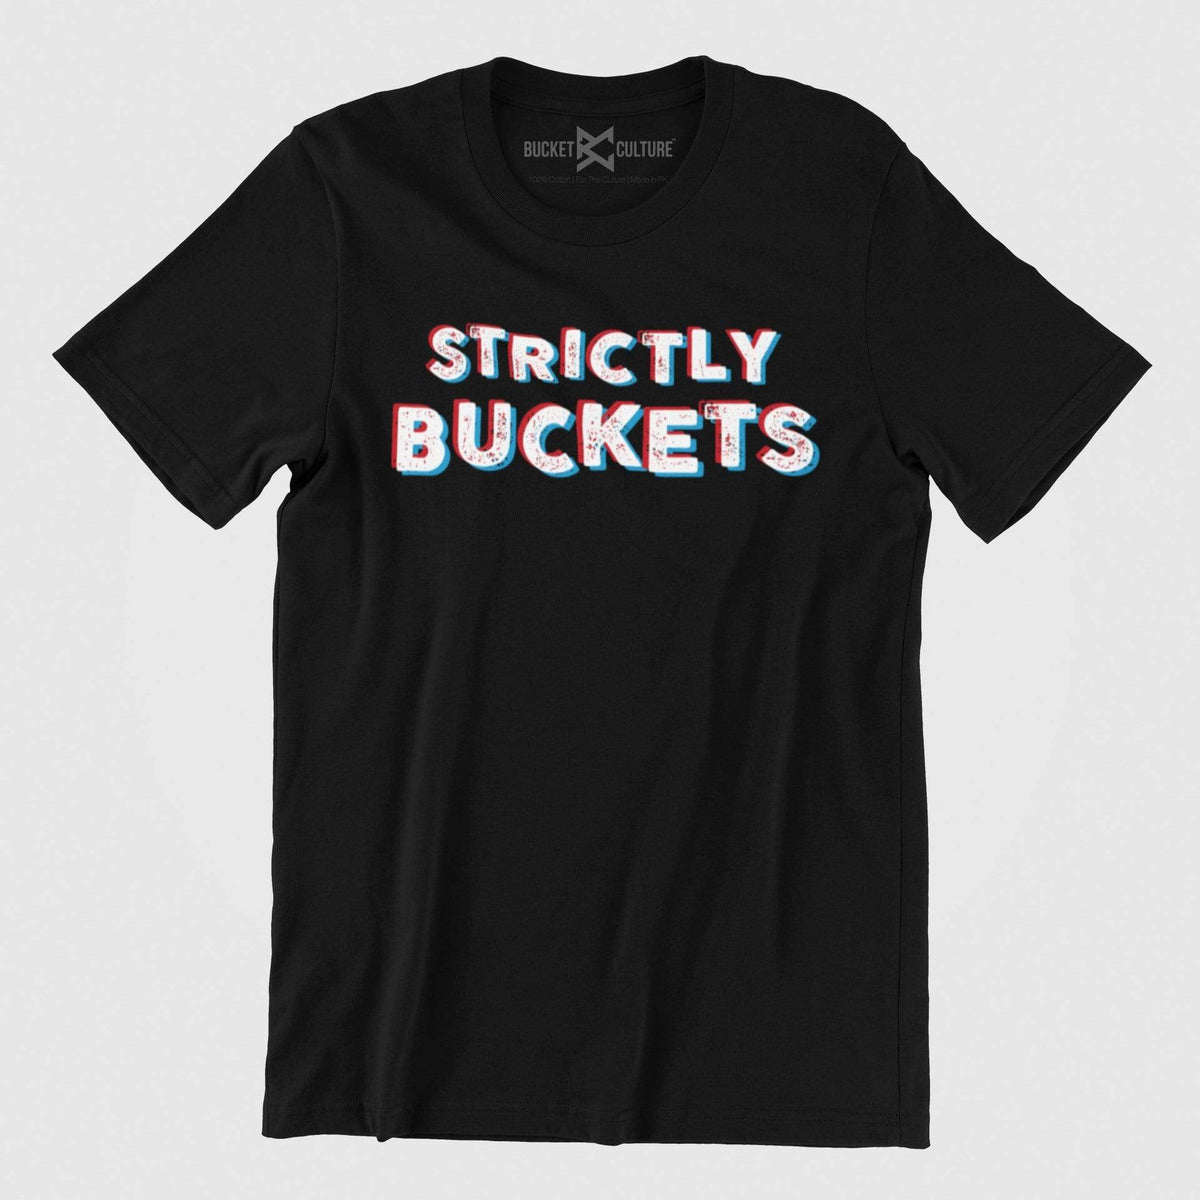 Strictly Buckets T-Shirt